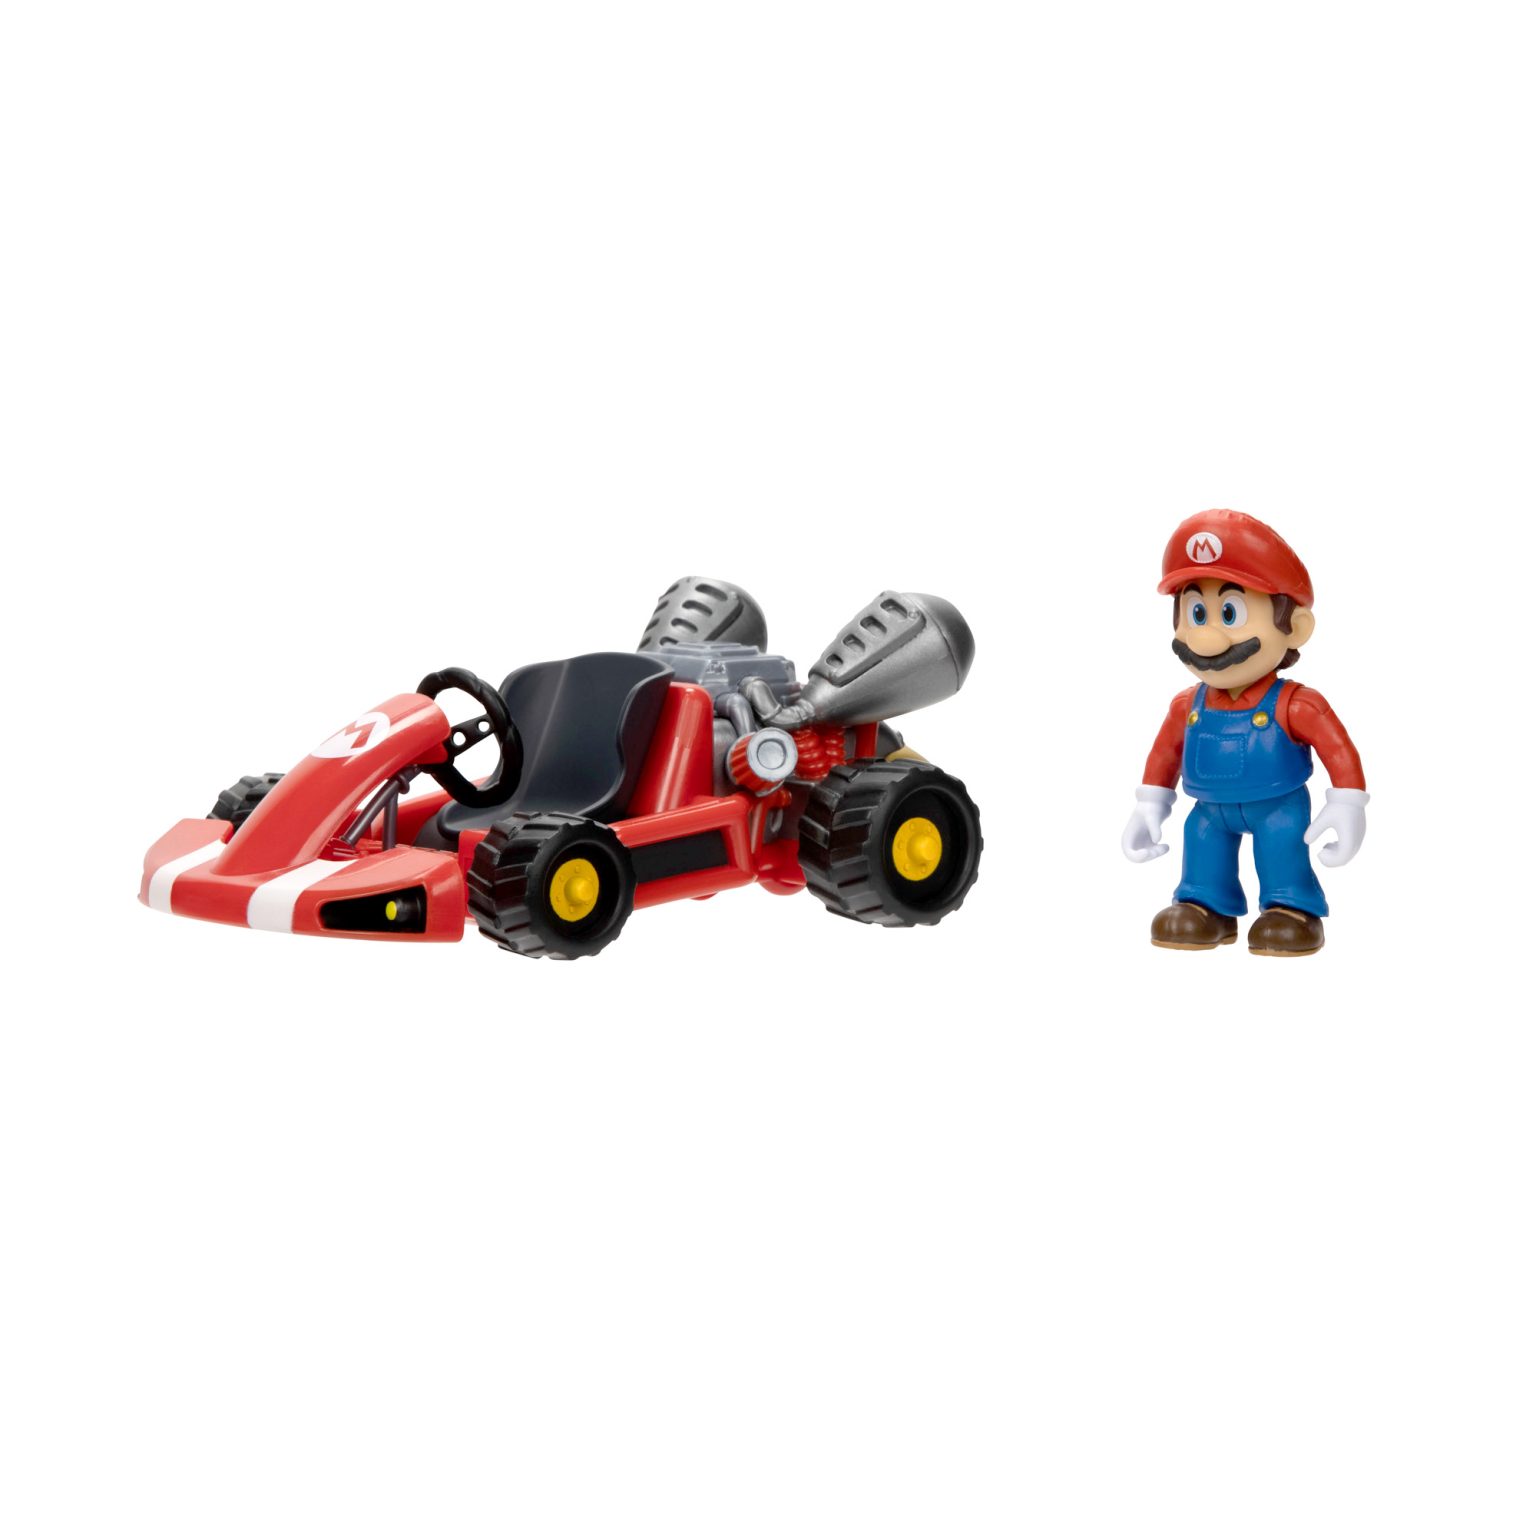 The Super Mario Bros. Movie 2.5” Figure with Pull Back Racer Mario